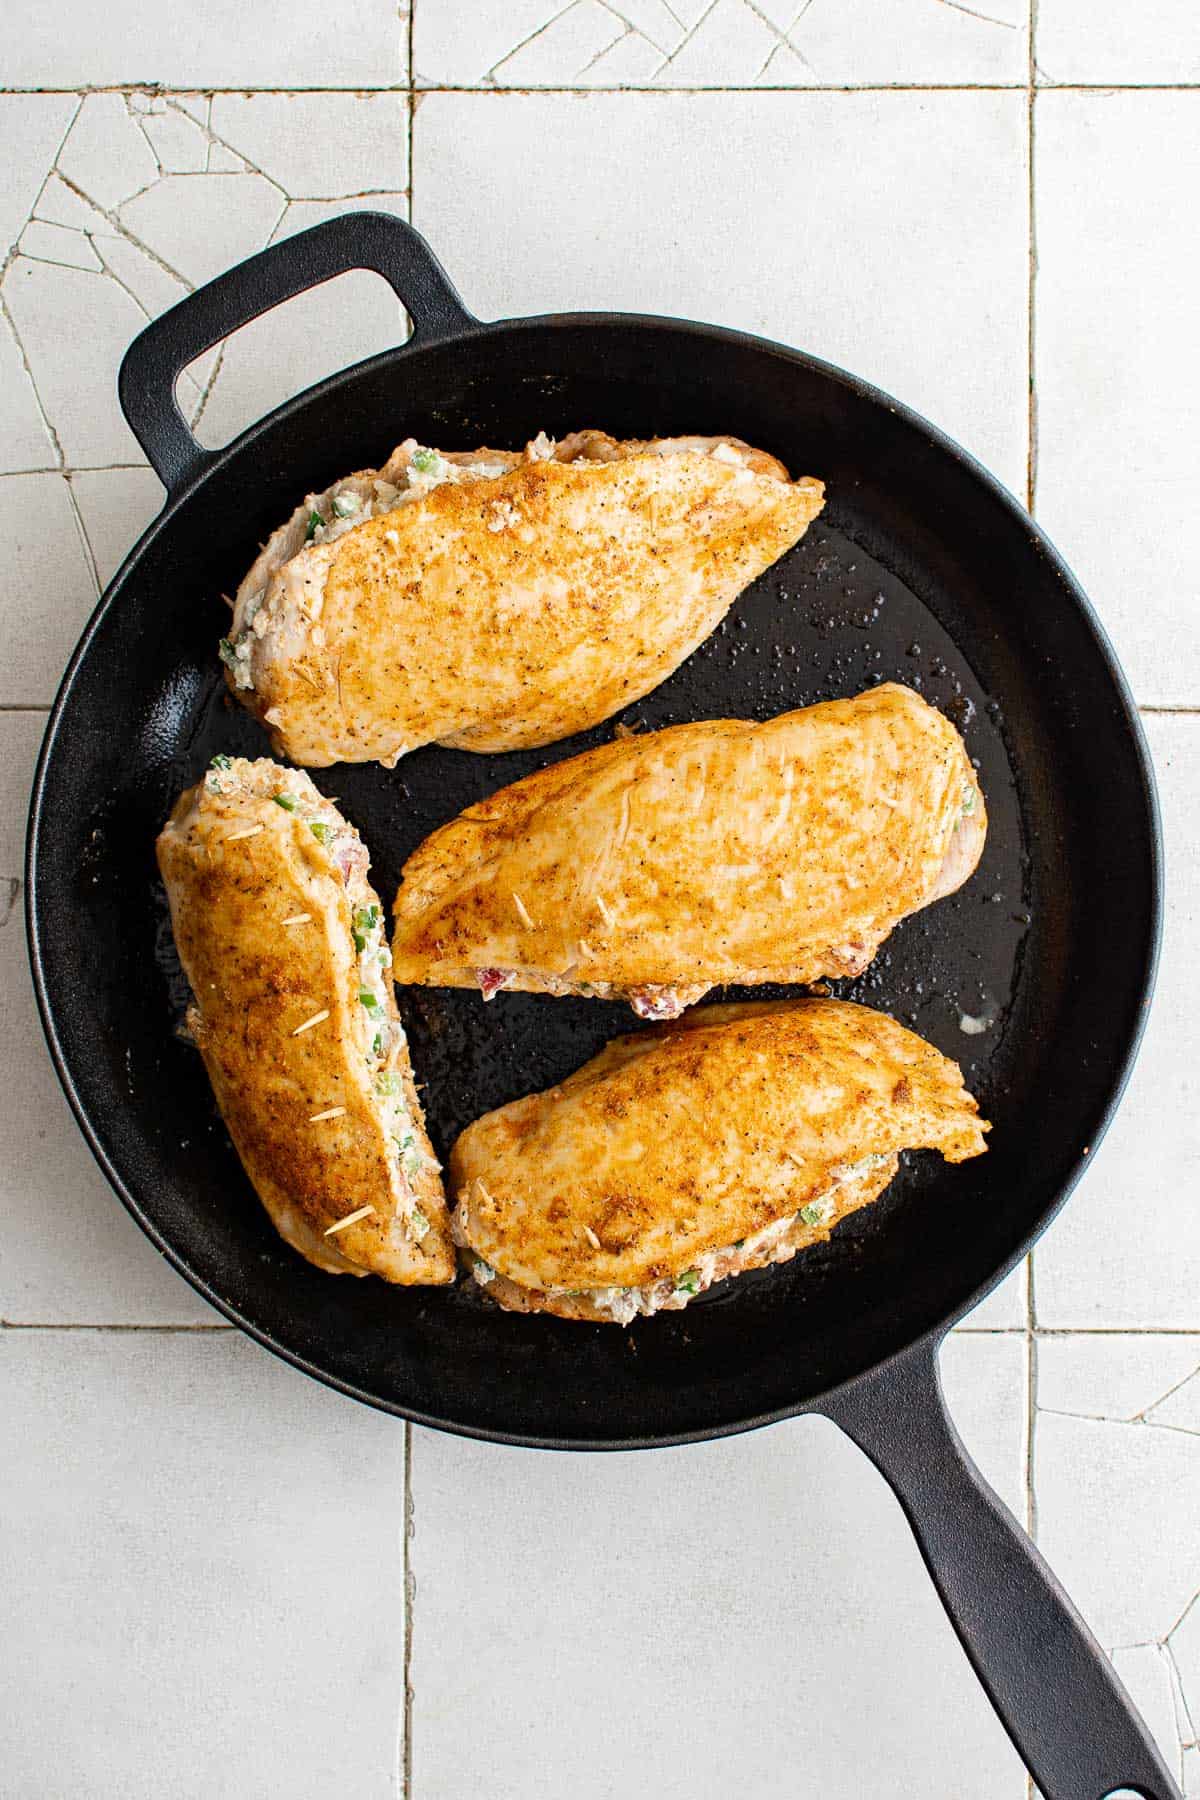 Seasoned and stuffed chickens being pan-seared in a cast iron skillet.